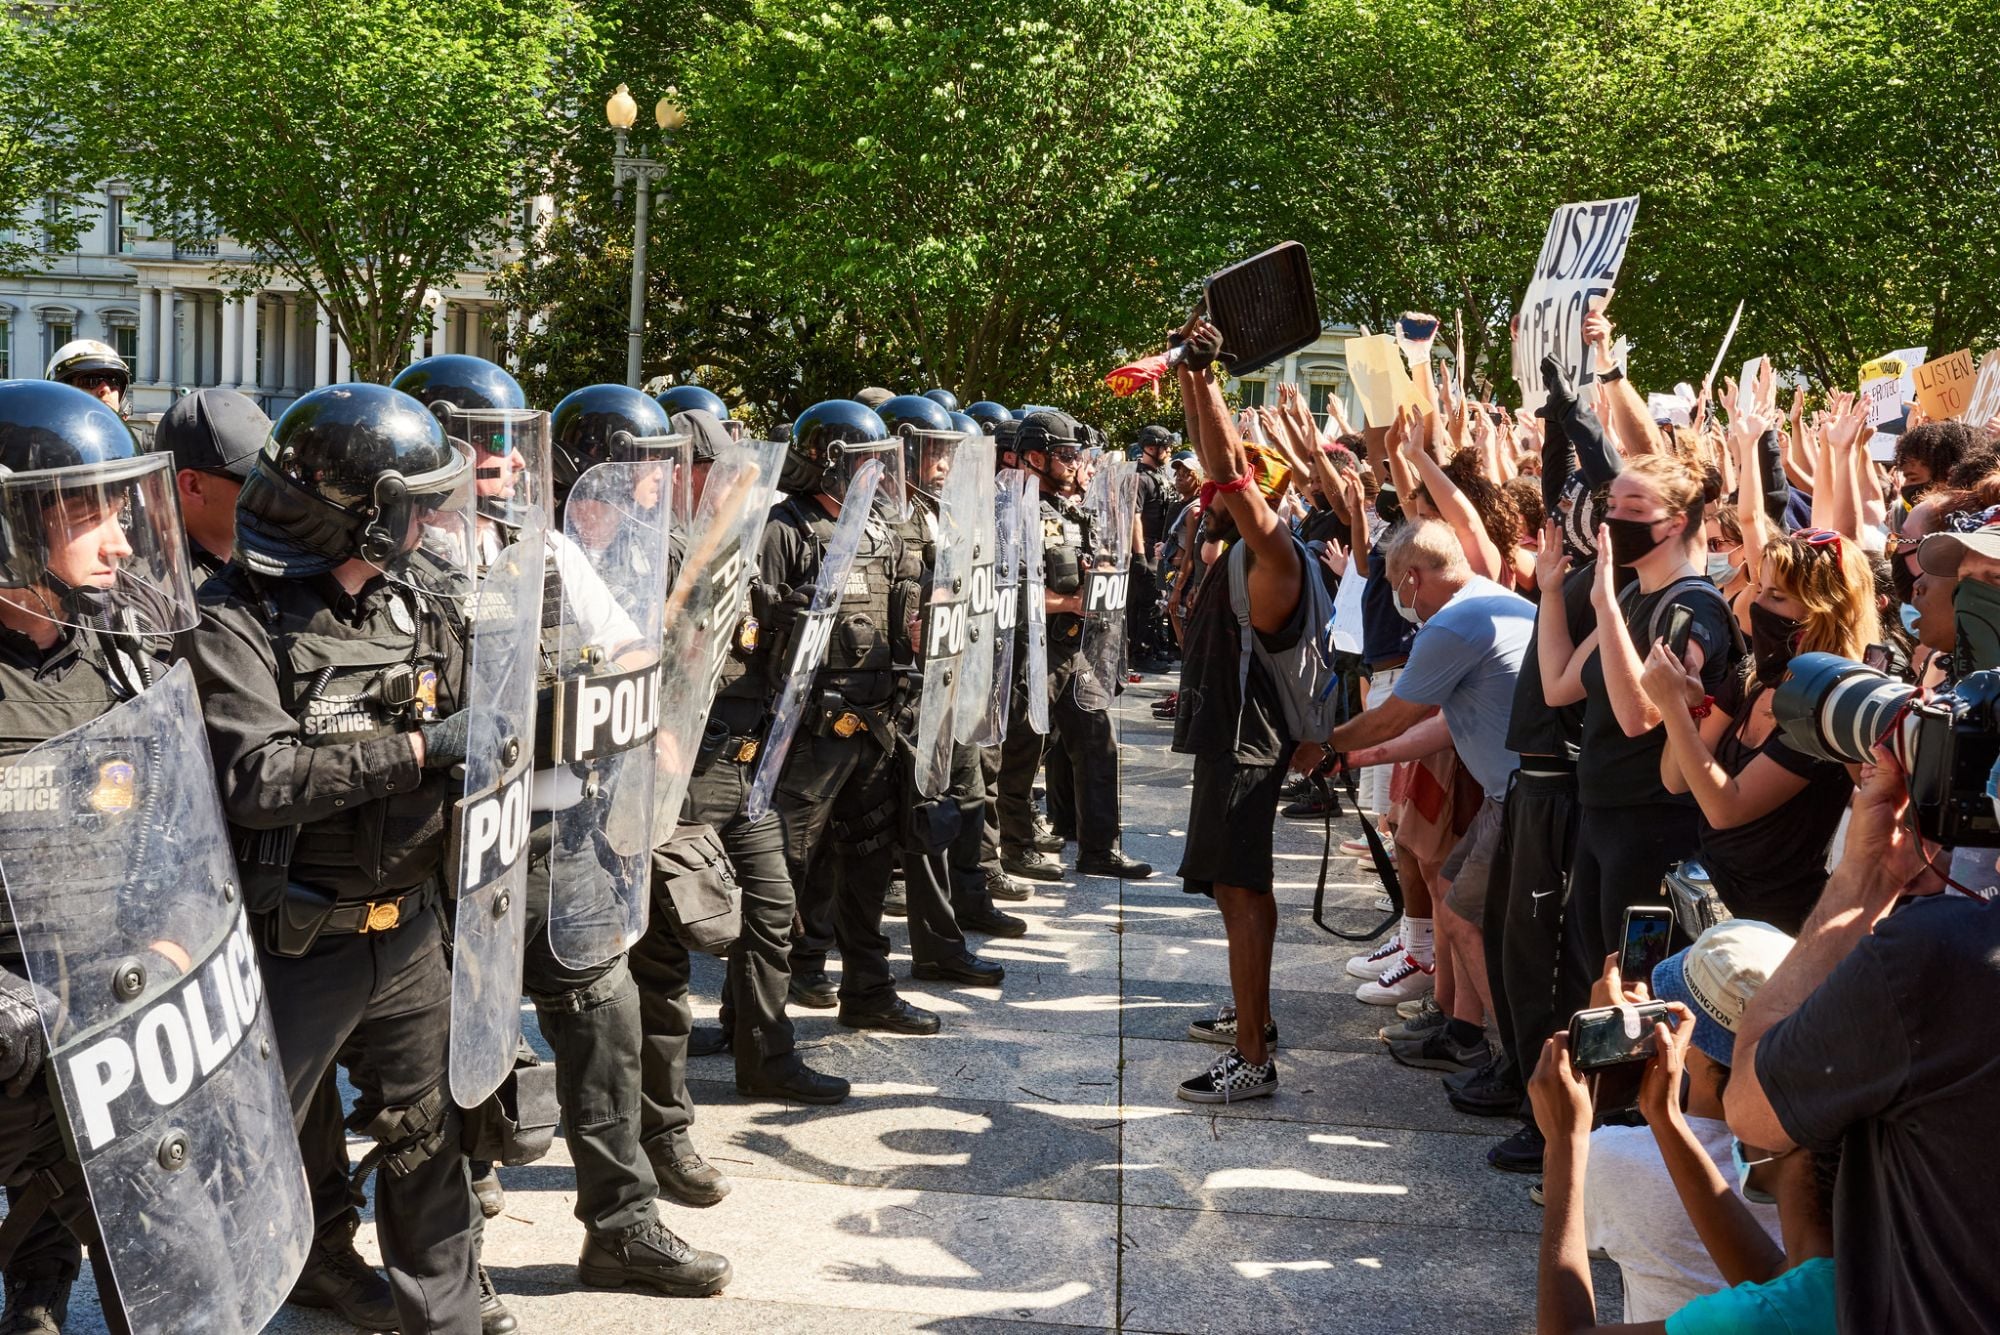 A Black Lives Matter protest  in Washington D.C., photographed by Geoff Livingston in May 2020.